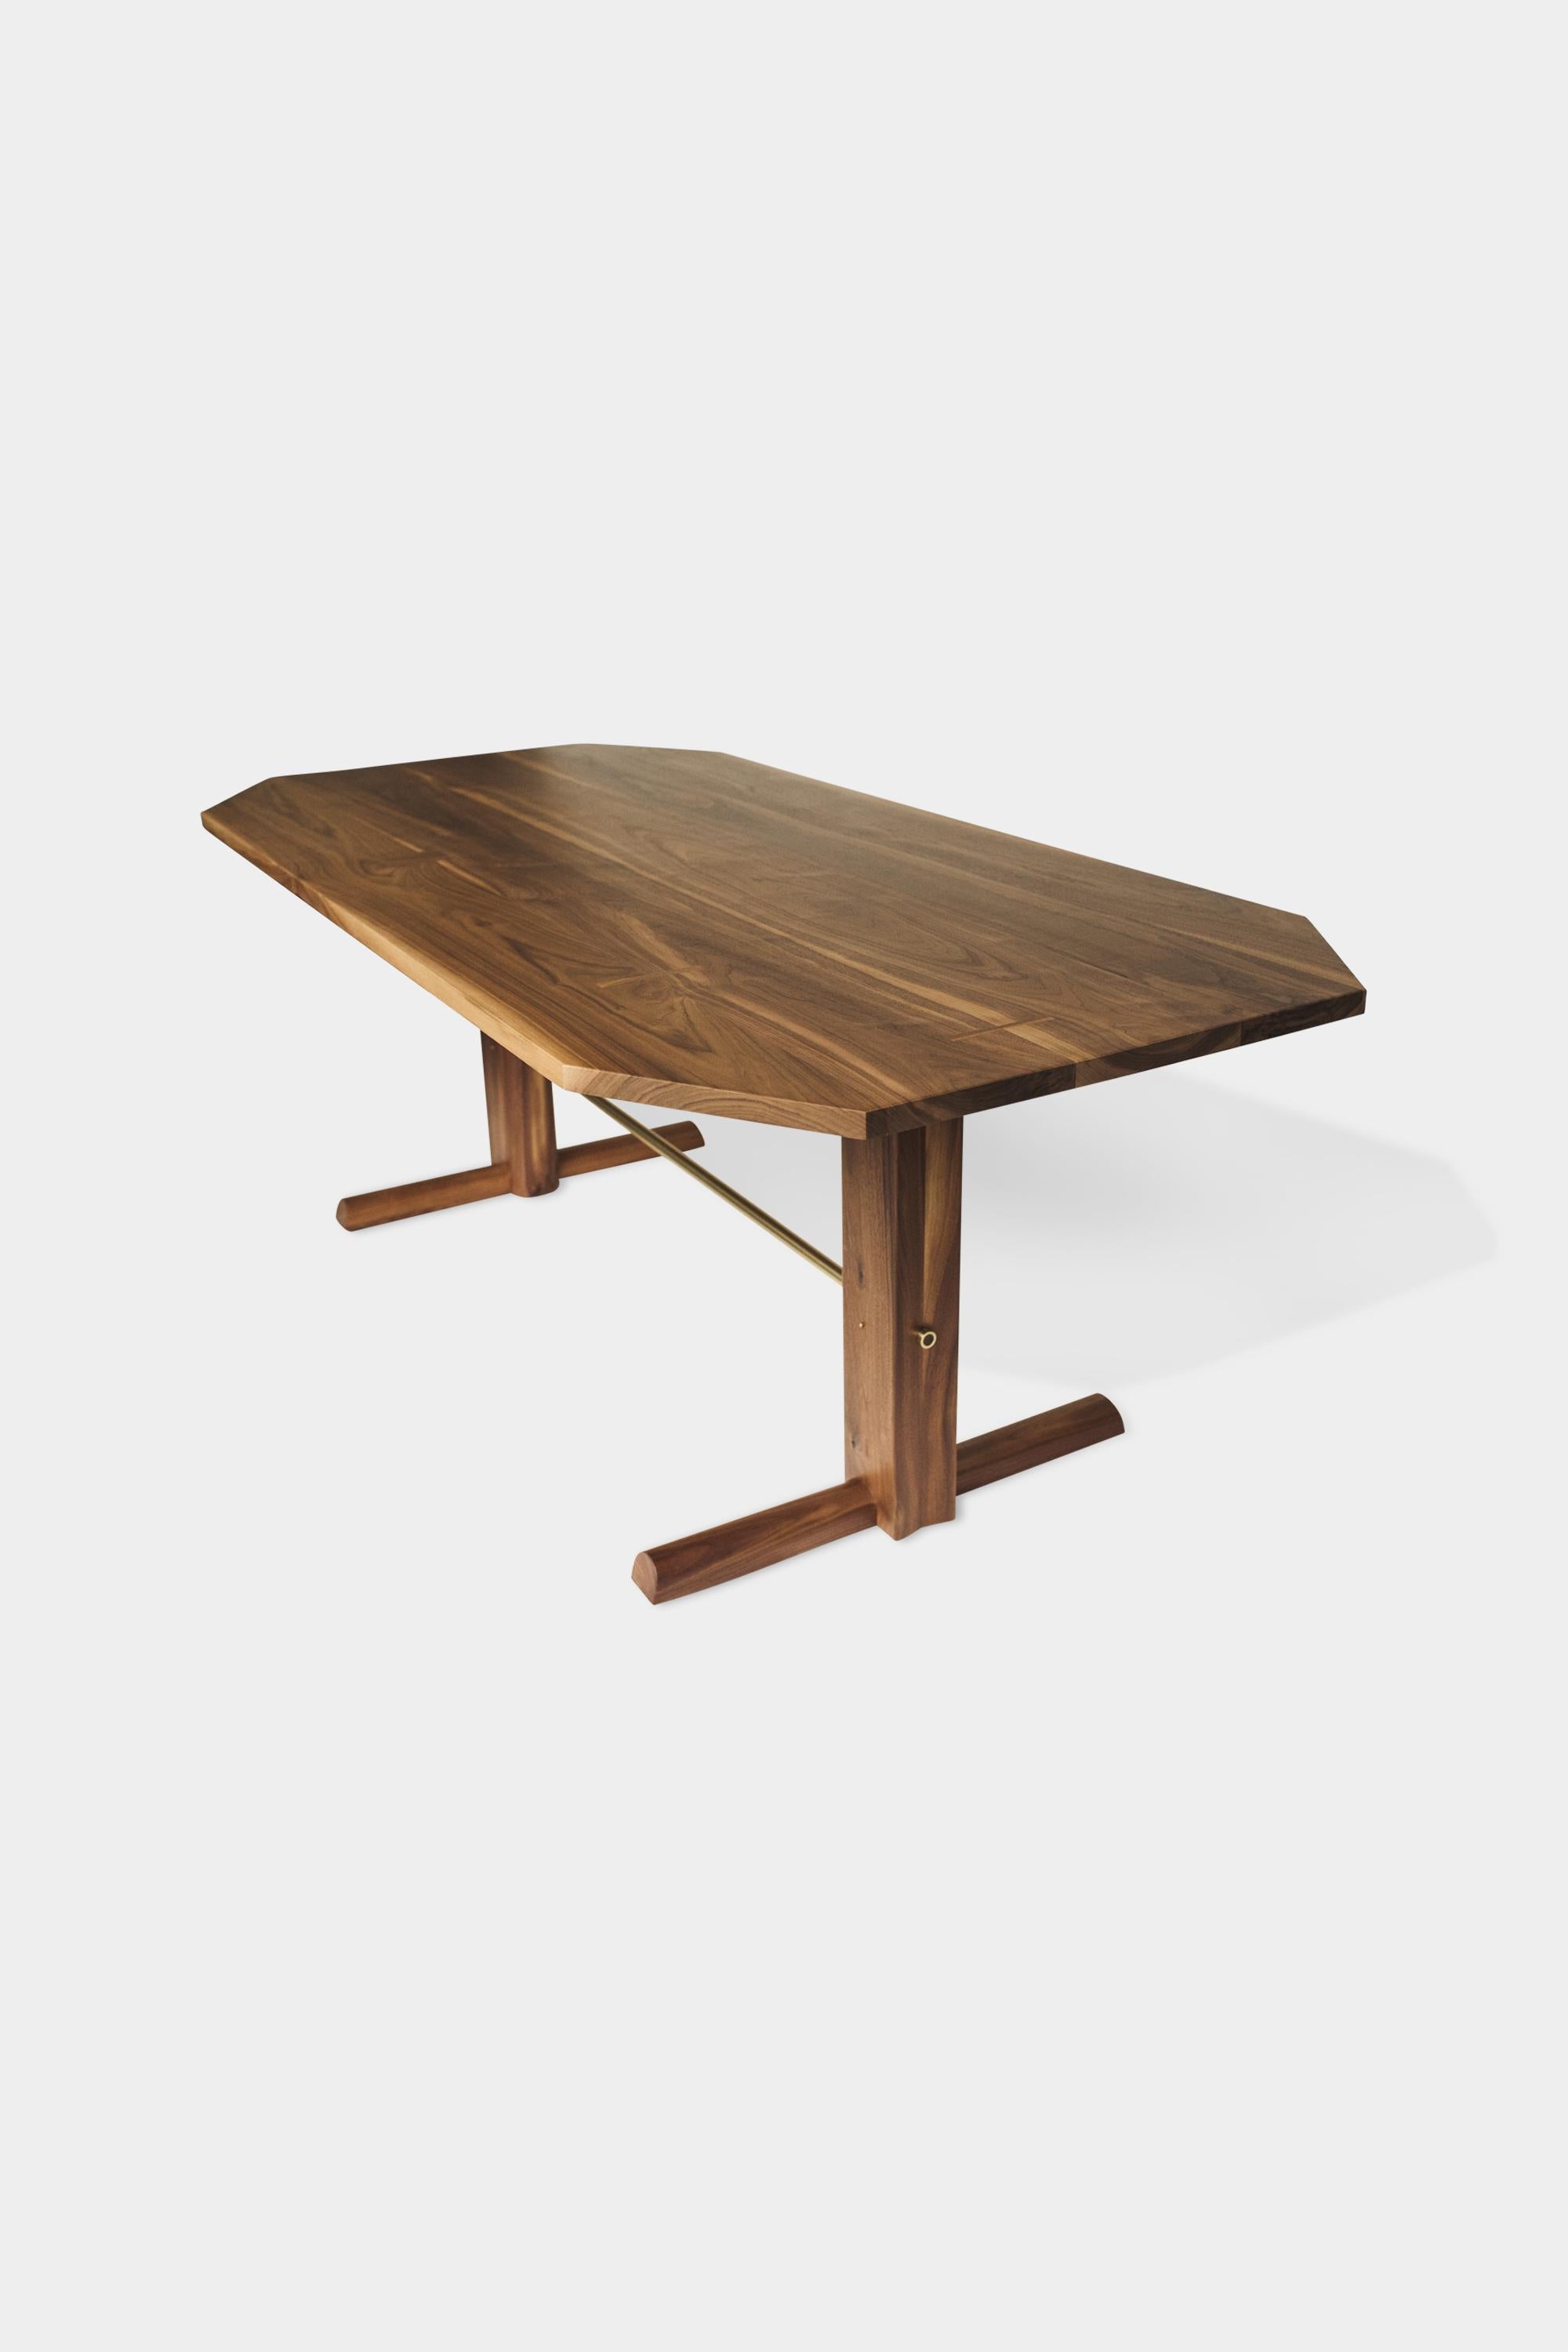 Clipped Corner BRIG Dining Table in Walnut In New Condition For Sale In North Hollywood, CA